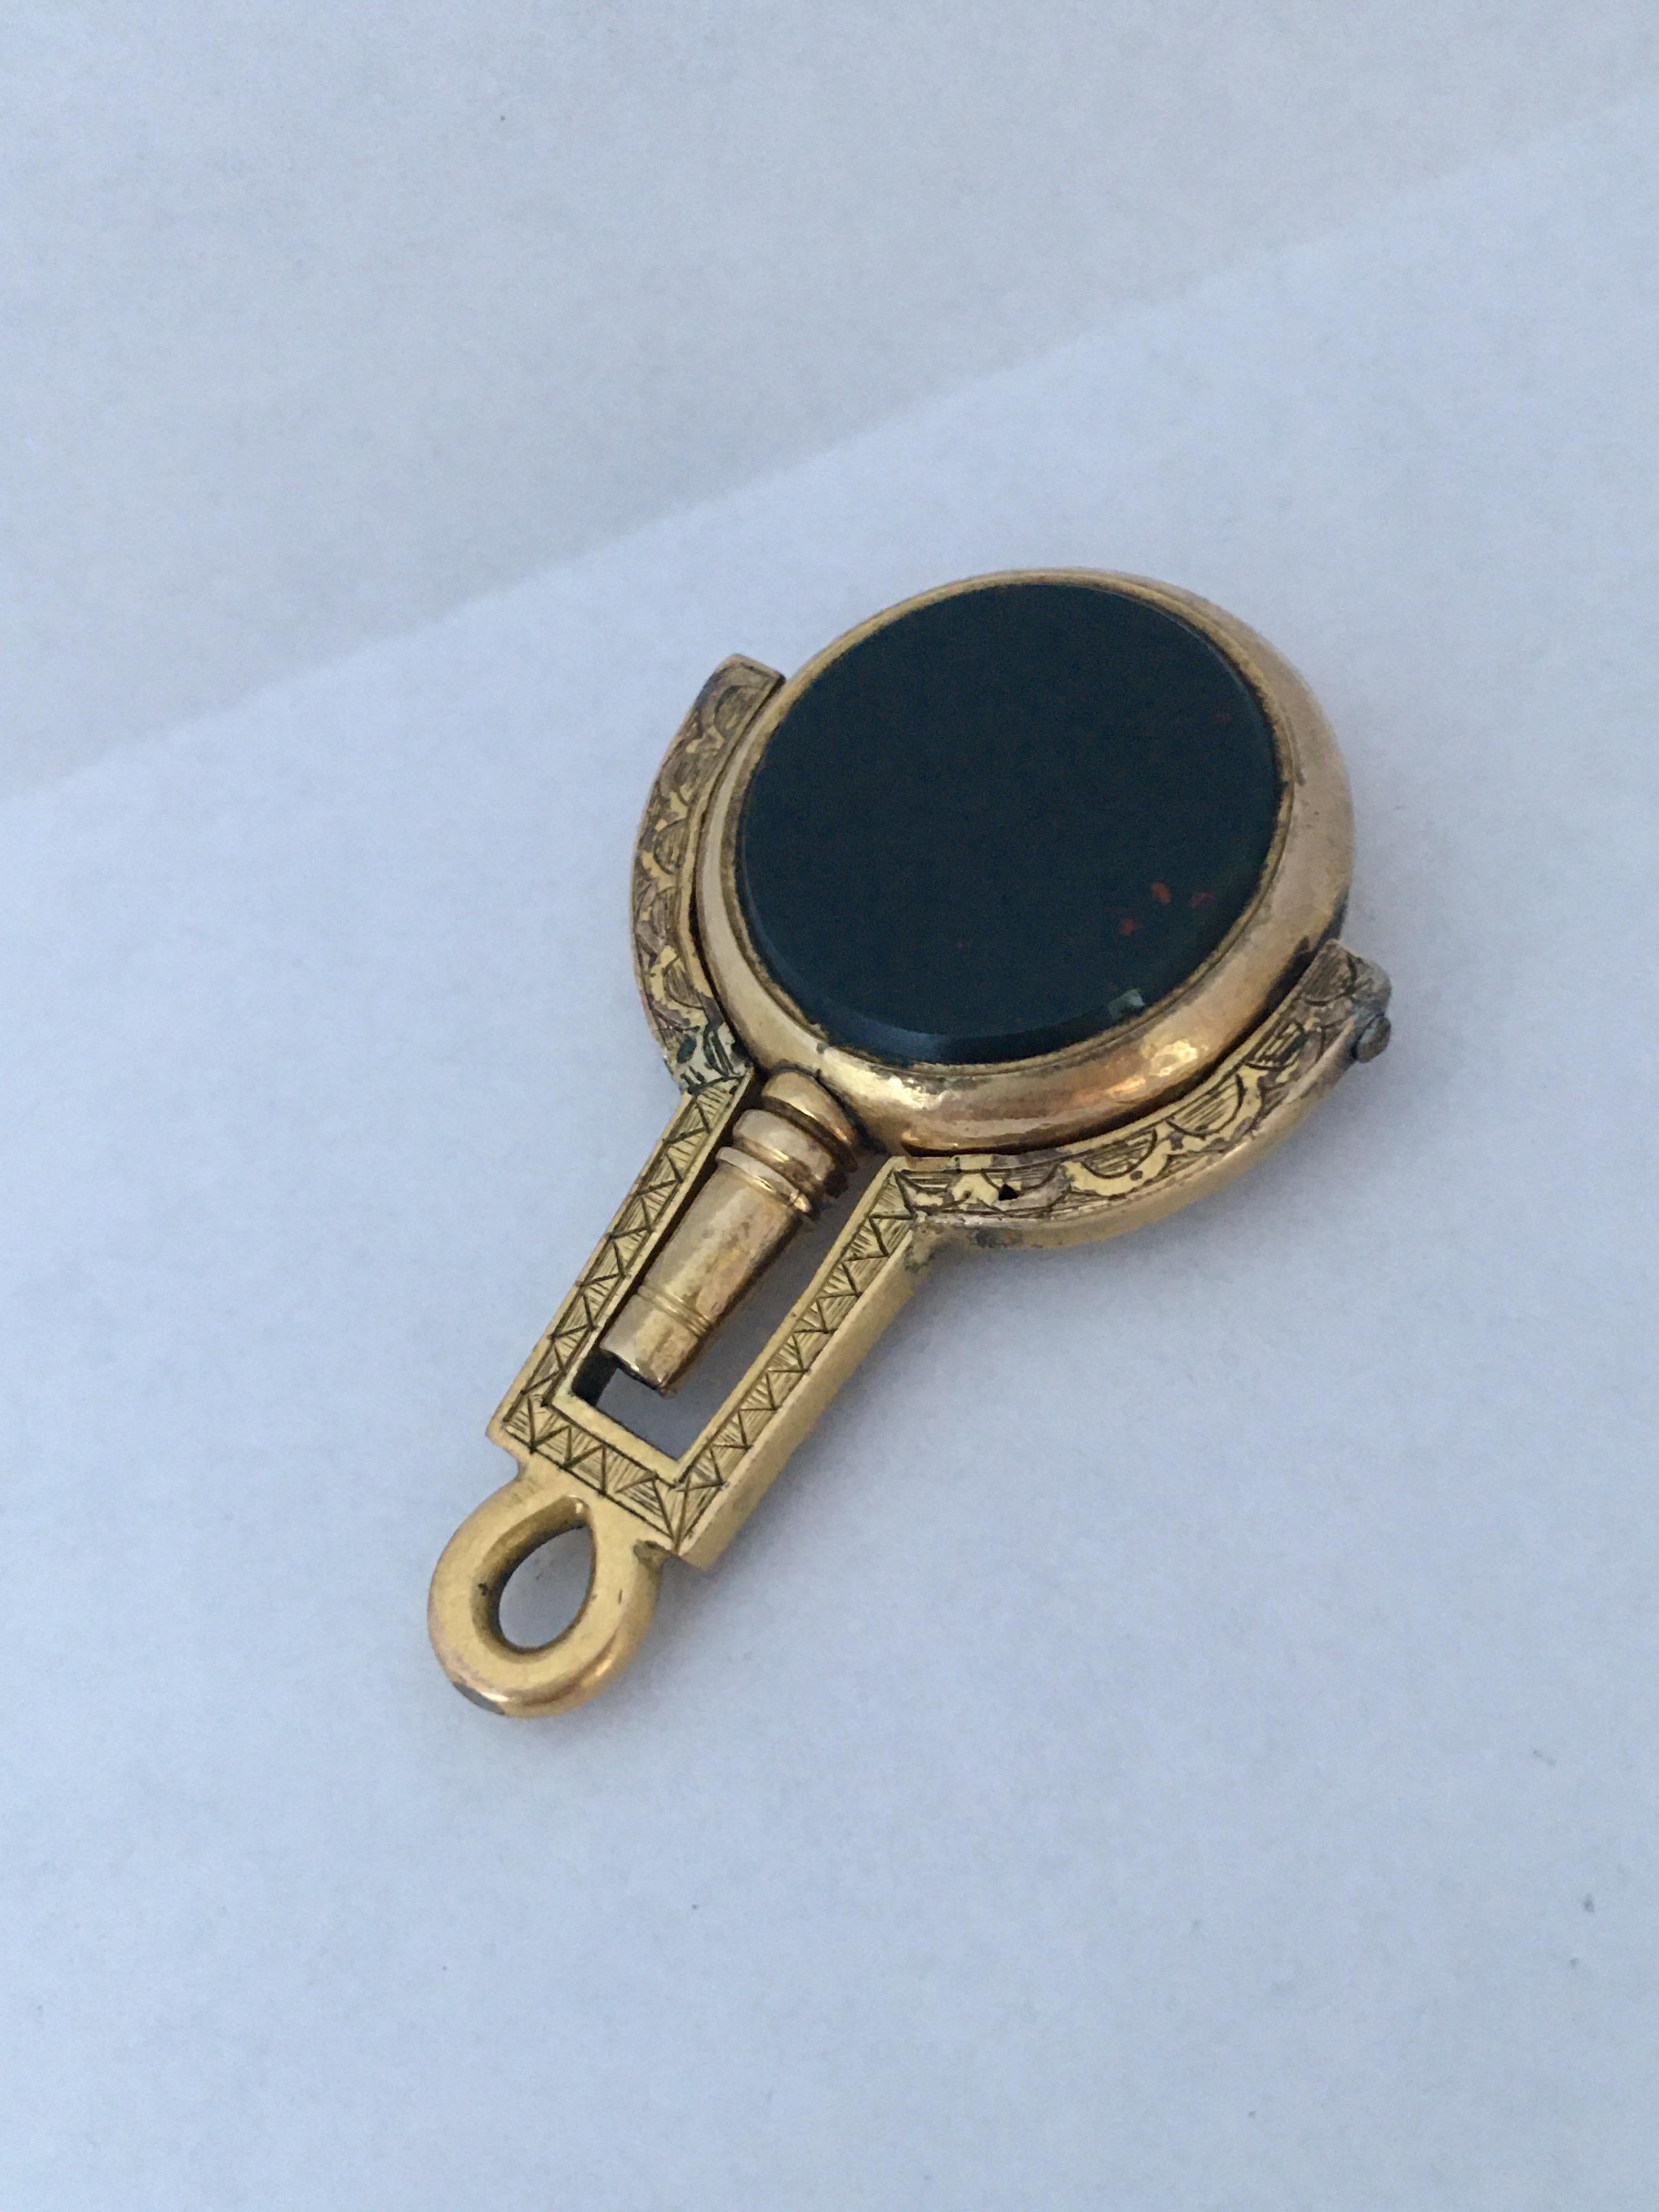 This stunning stone set swivel fob with watch key. For watch chain or pendant. Set with a polished bloodstone on one side and a sardonyx on the other side. It measured 40mm long as a pendant or 50mm long as a watch key and 26mm wide and weigh 8.3